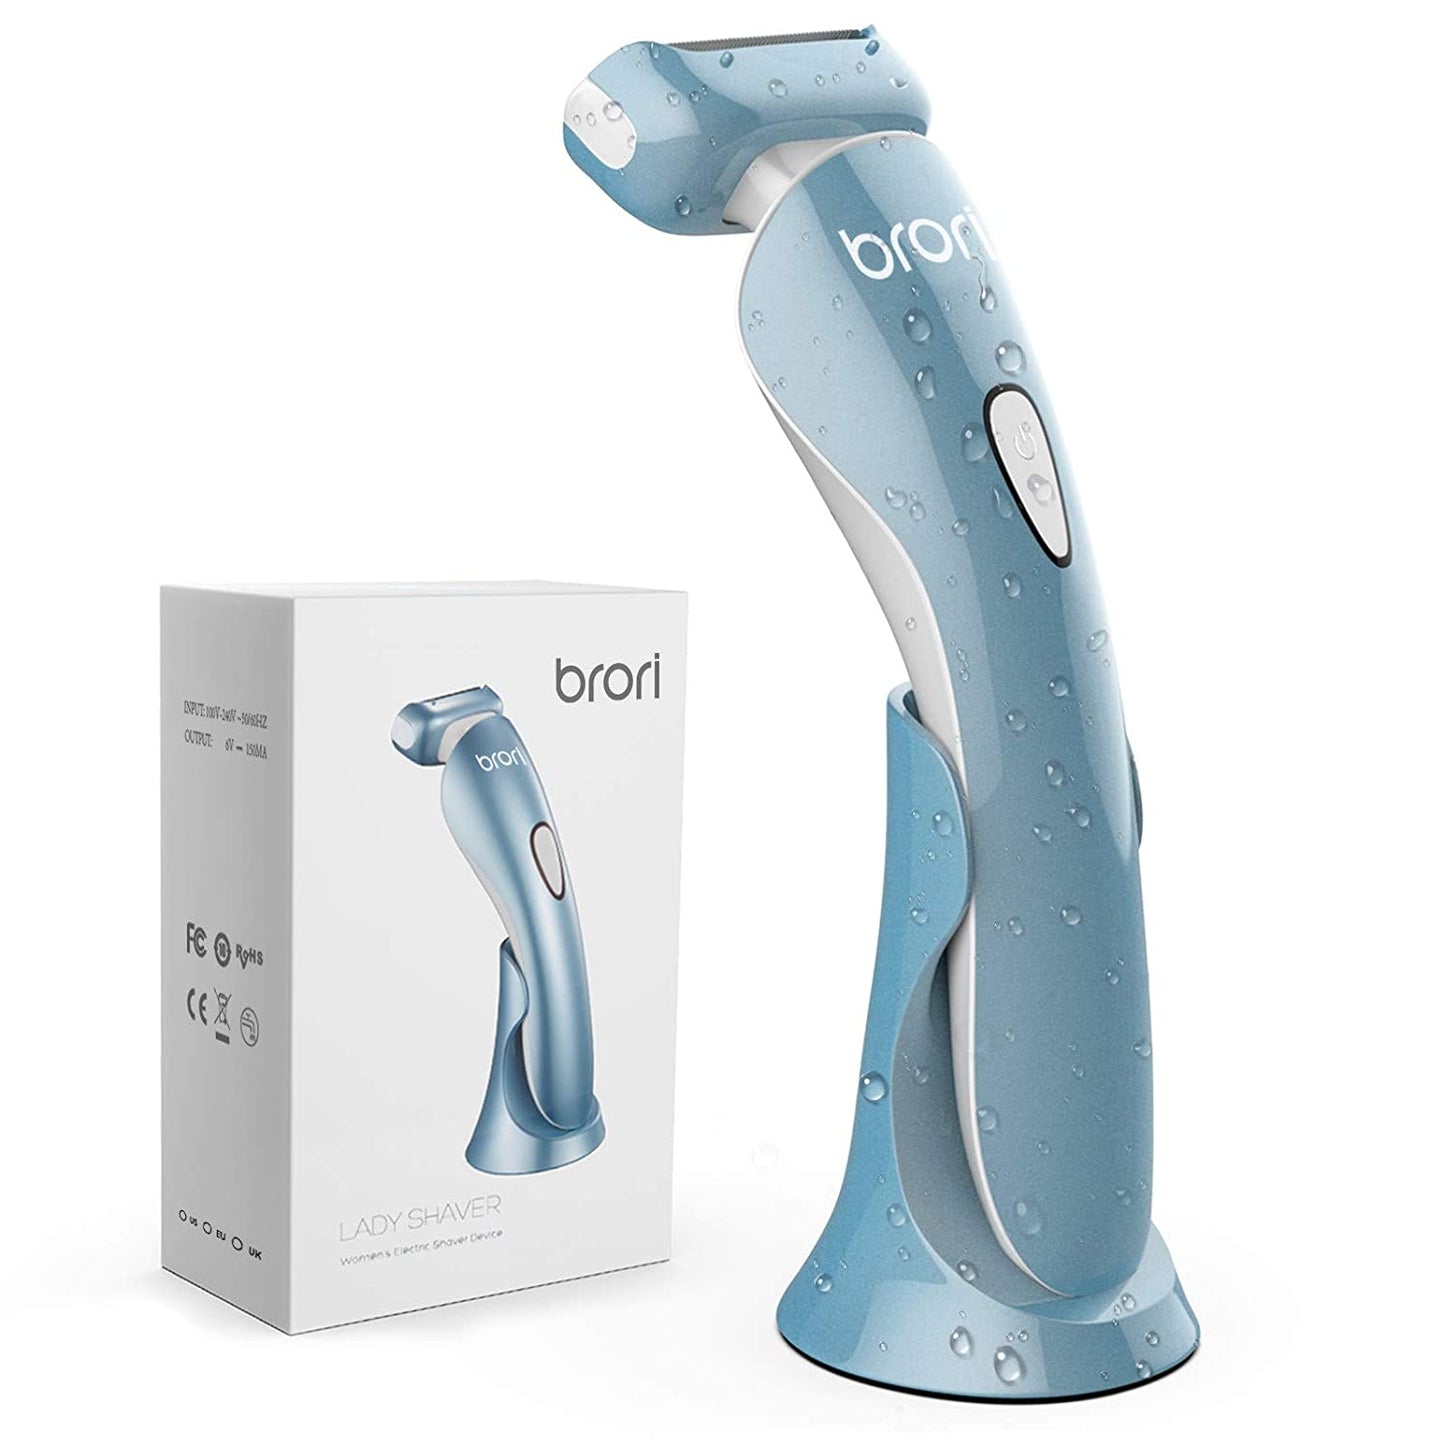 Brori Electric Razor for Women - Womens Shaver Bikini Trimmer Body Hair Removal for Legs and Underarms Rechargeable Wet and Dry Painless Cordless with LED Light, Blue - Home Decor Gifts and More